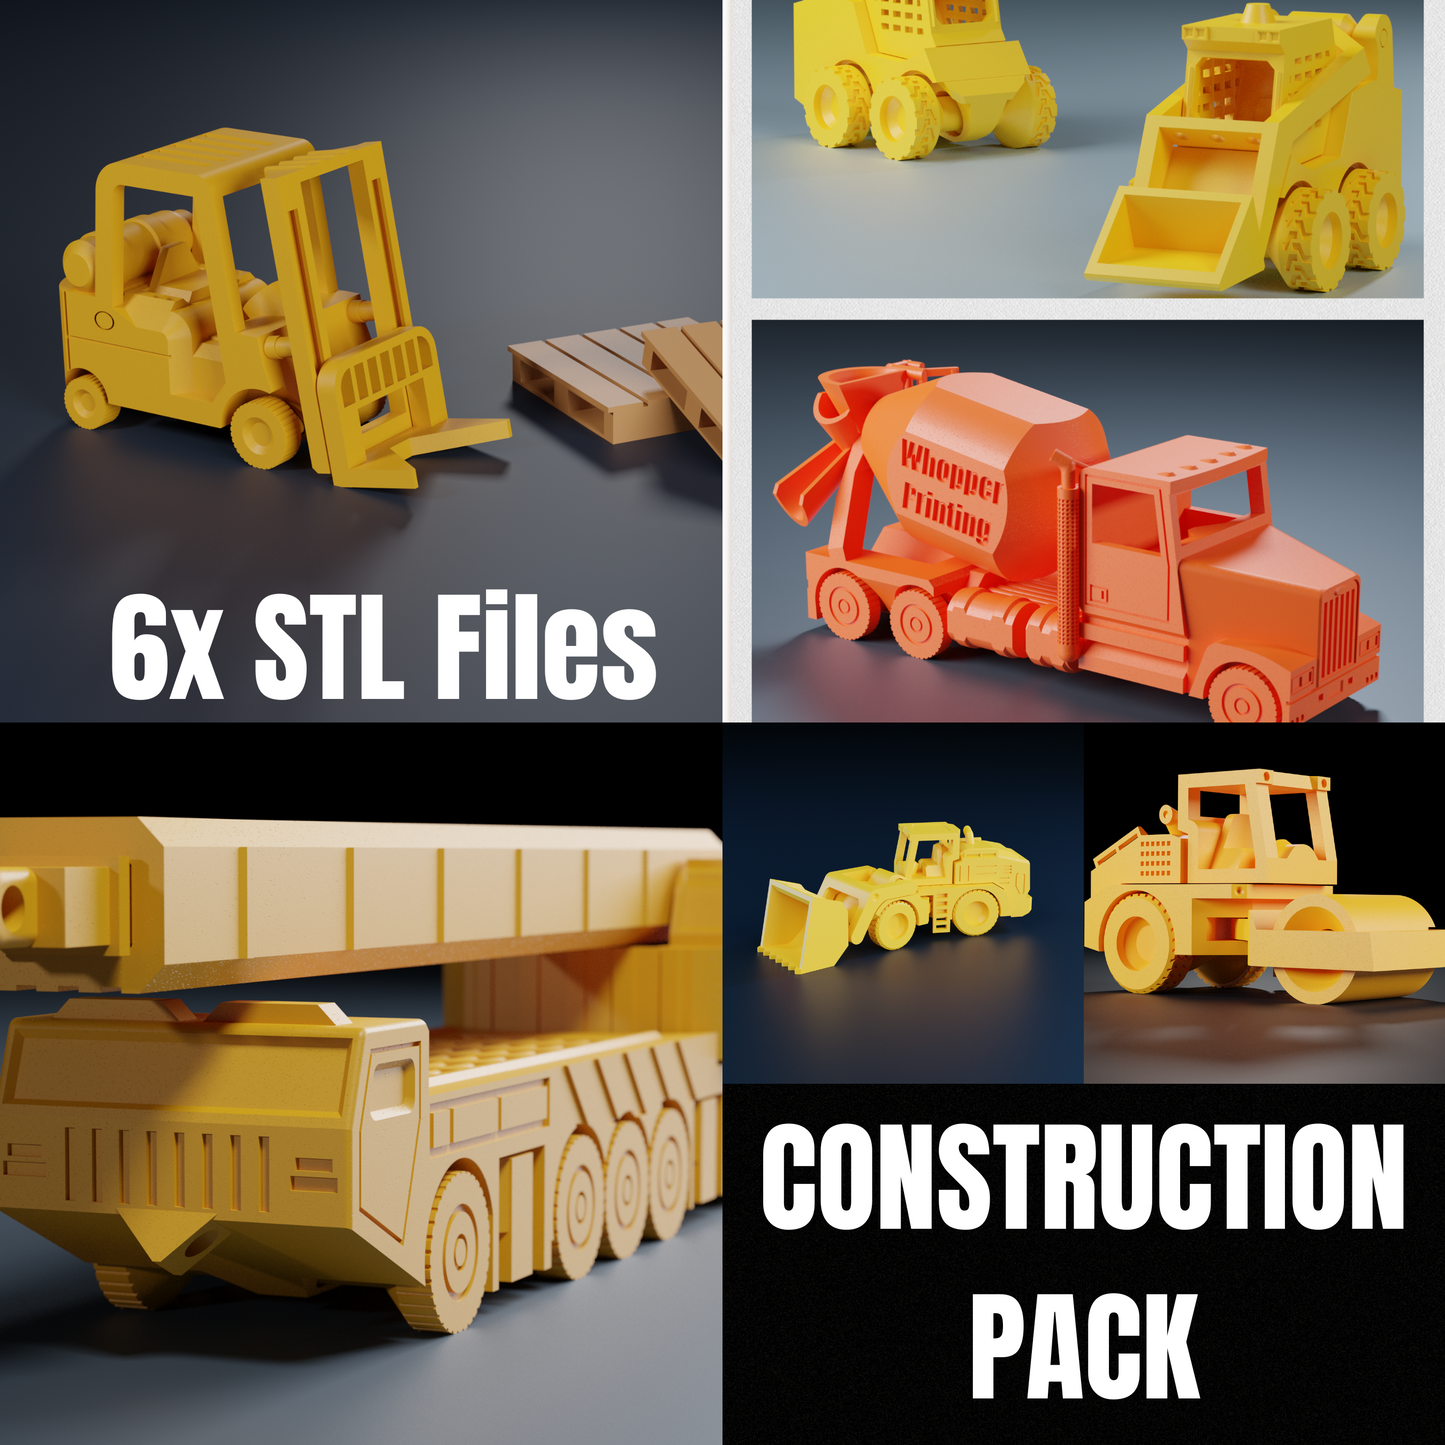 Construction Print-In-Place Pack | 6 Print-In-Place Files